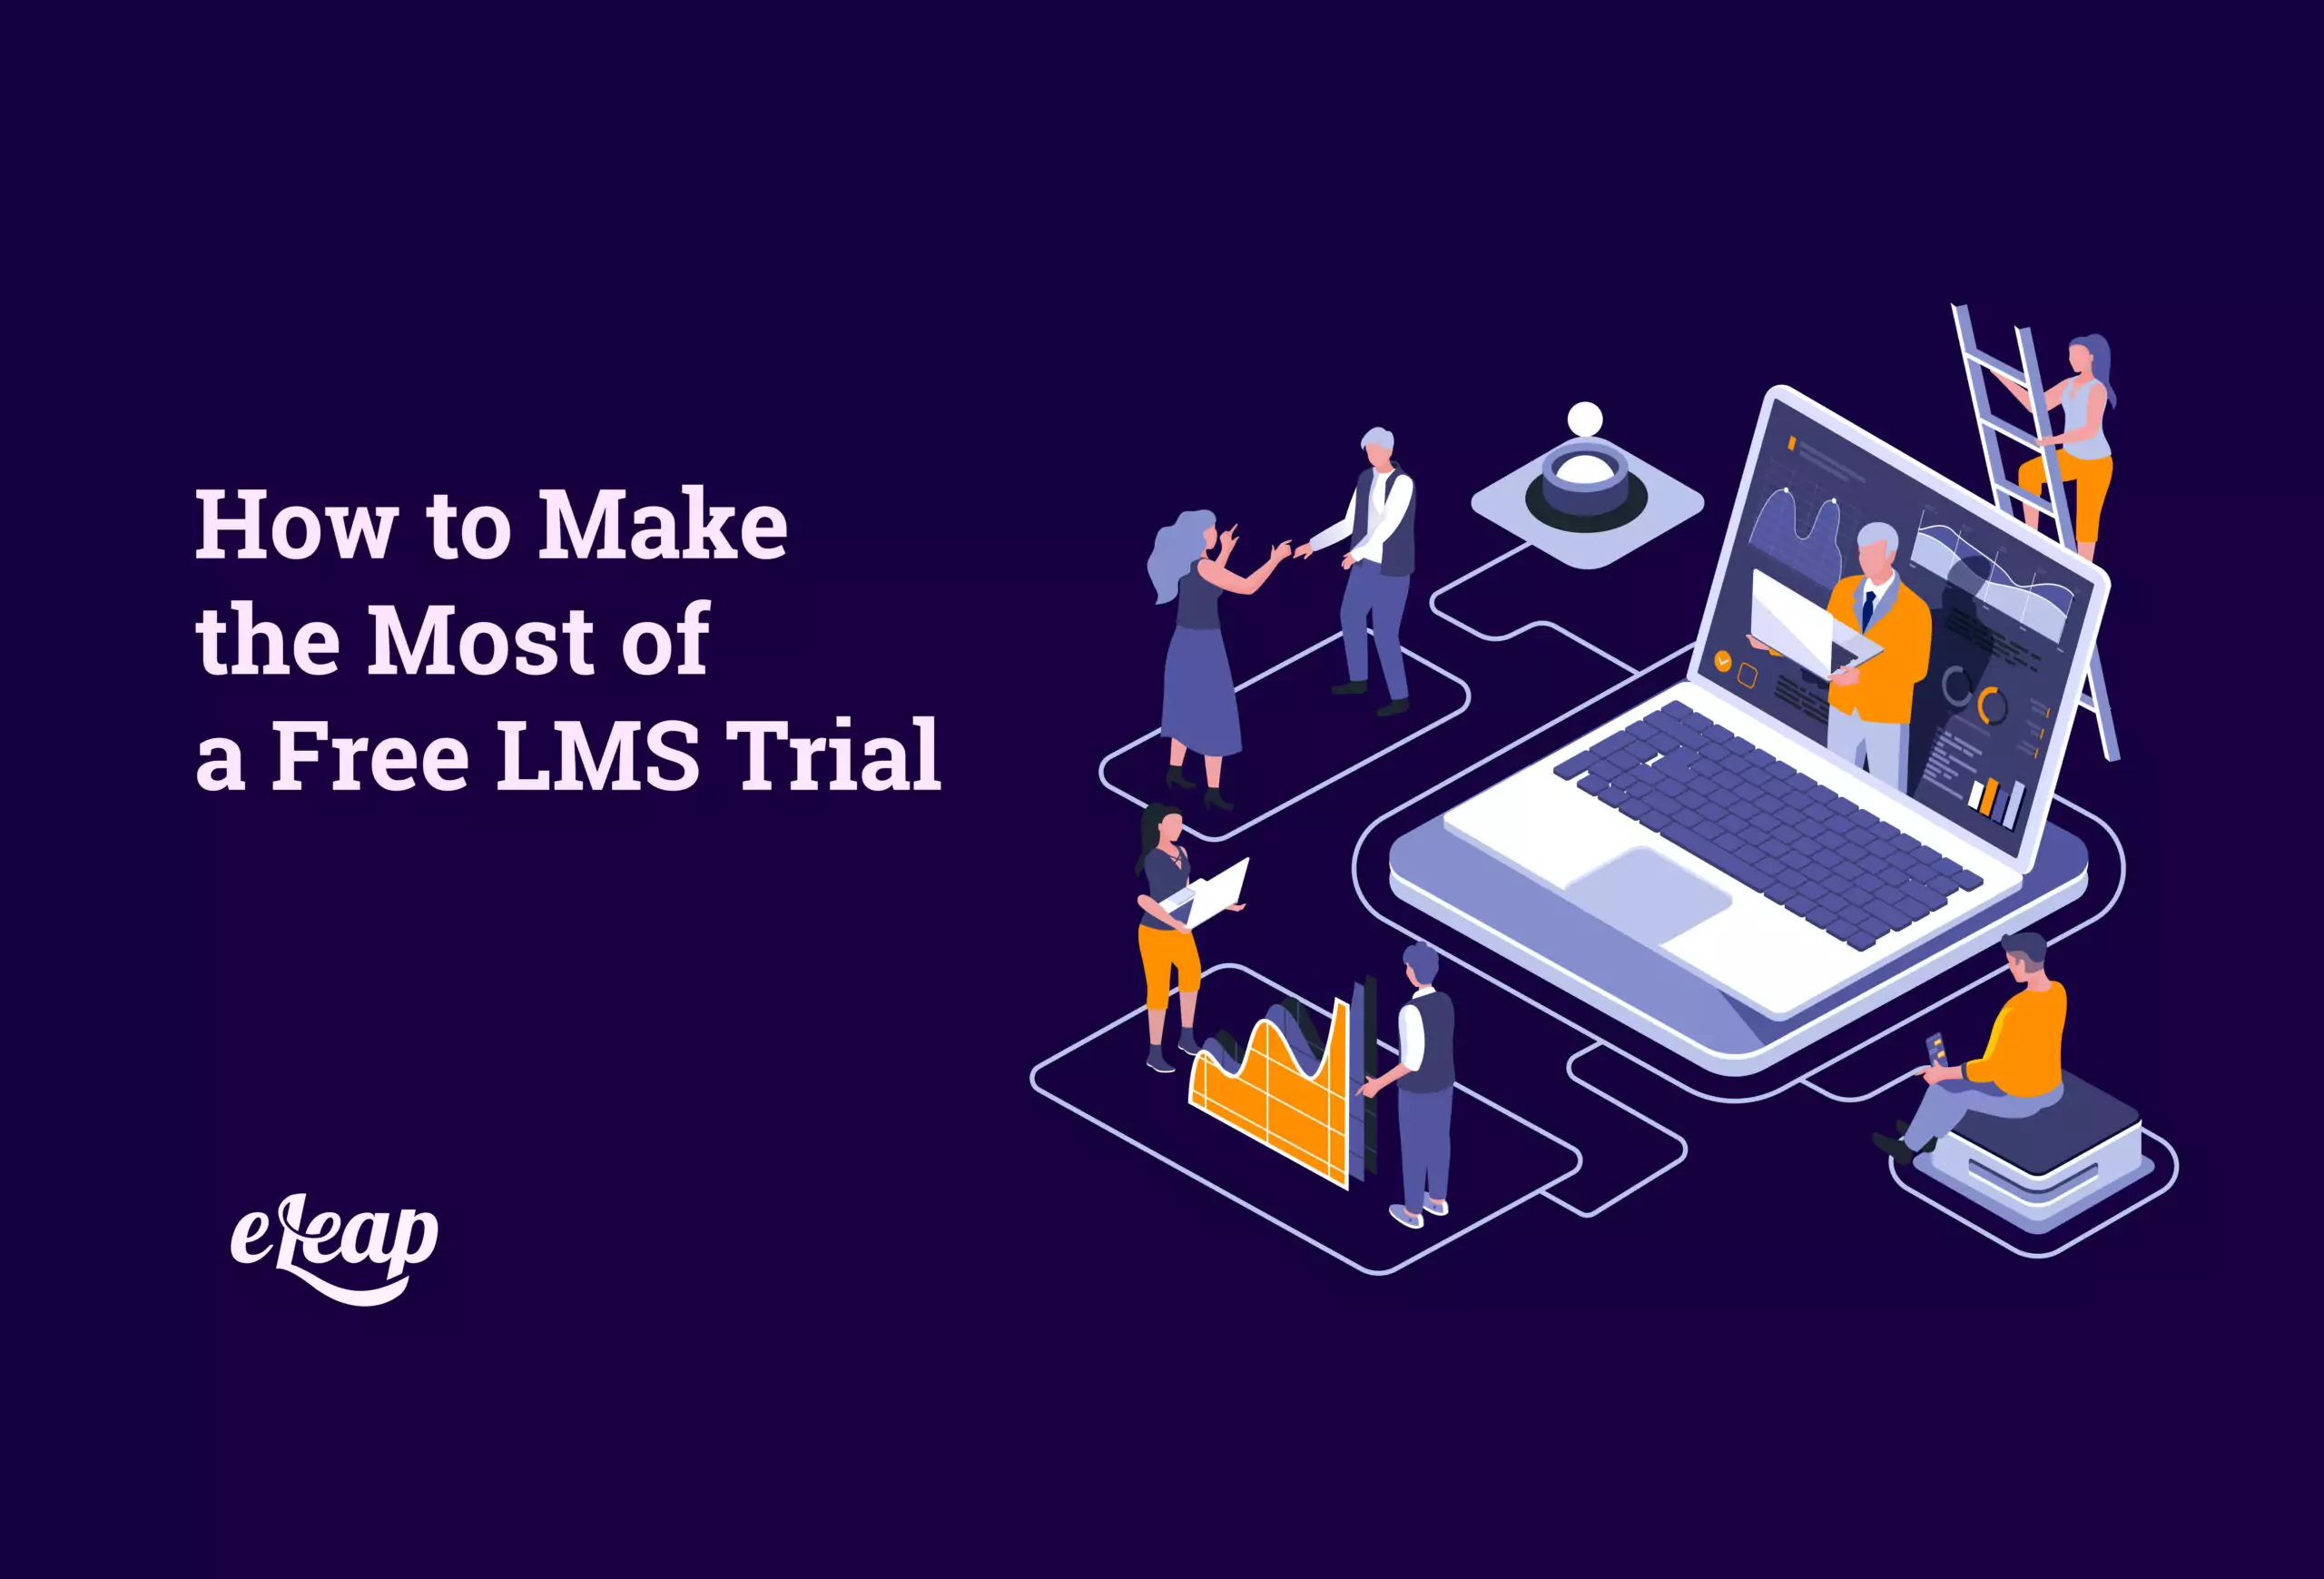 How to Make the Most of a Free LMS Trial